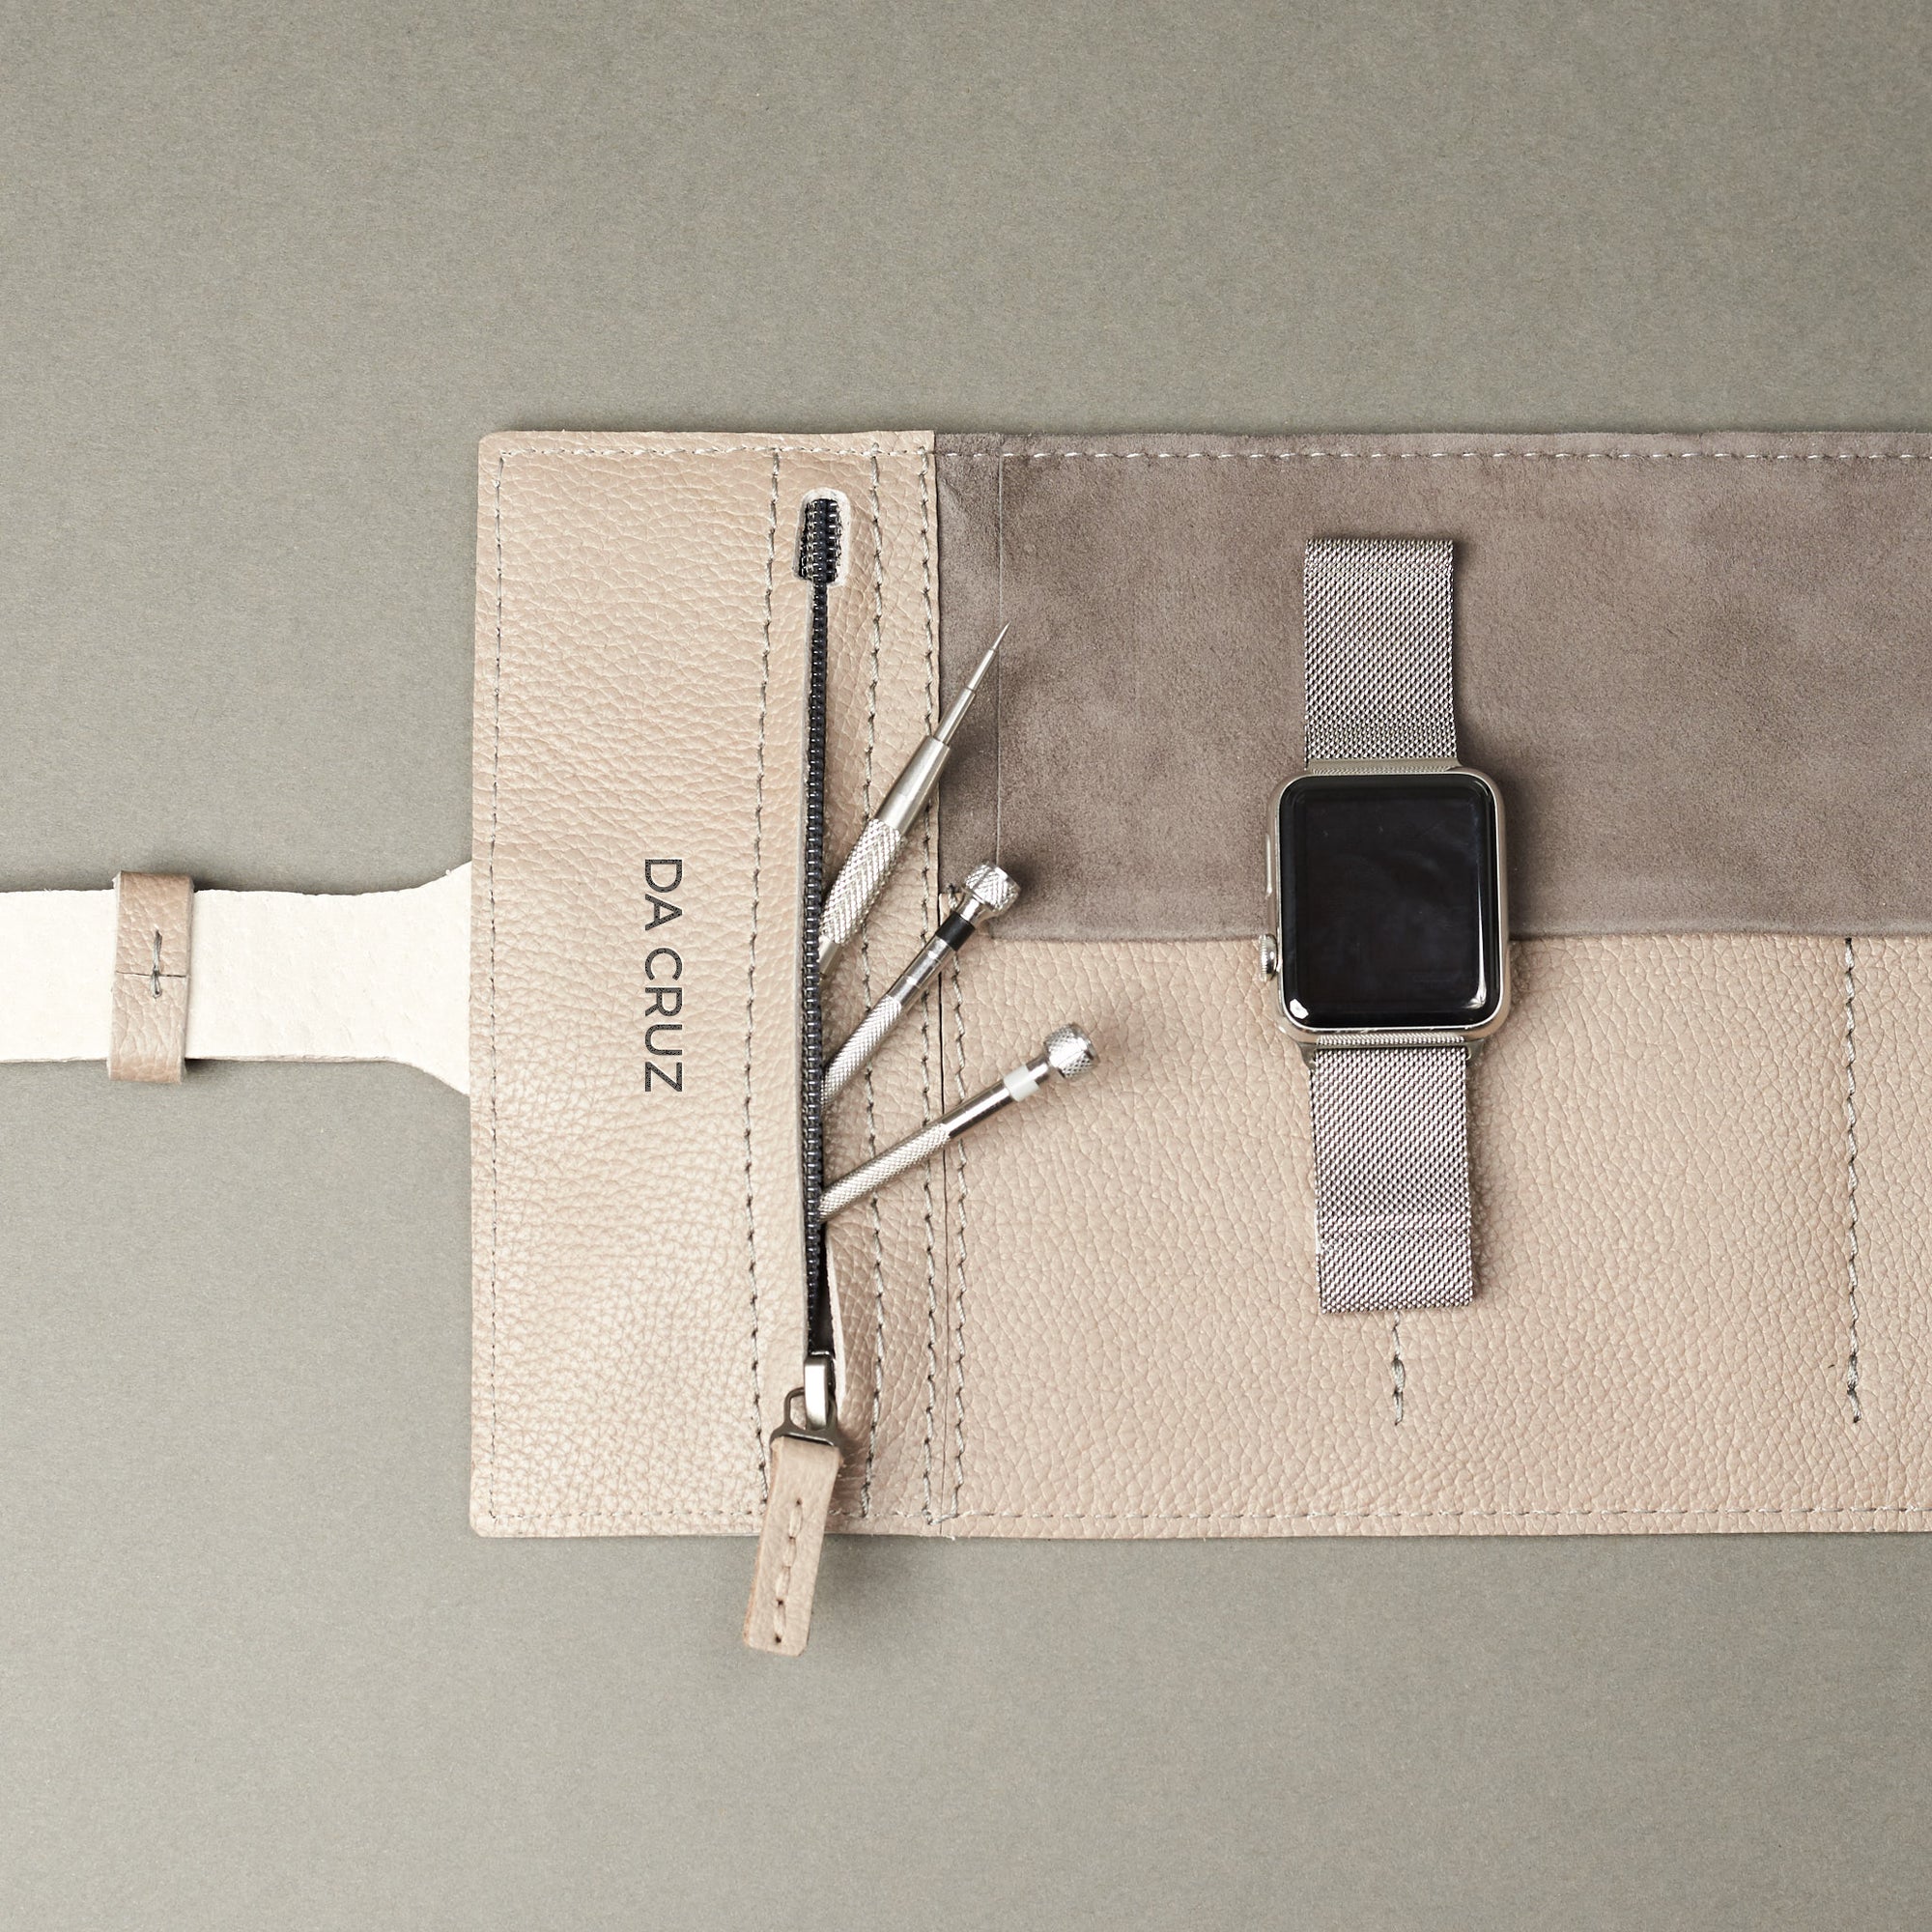 Apple watch travel case. Watch pouch grey by Capra Leather